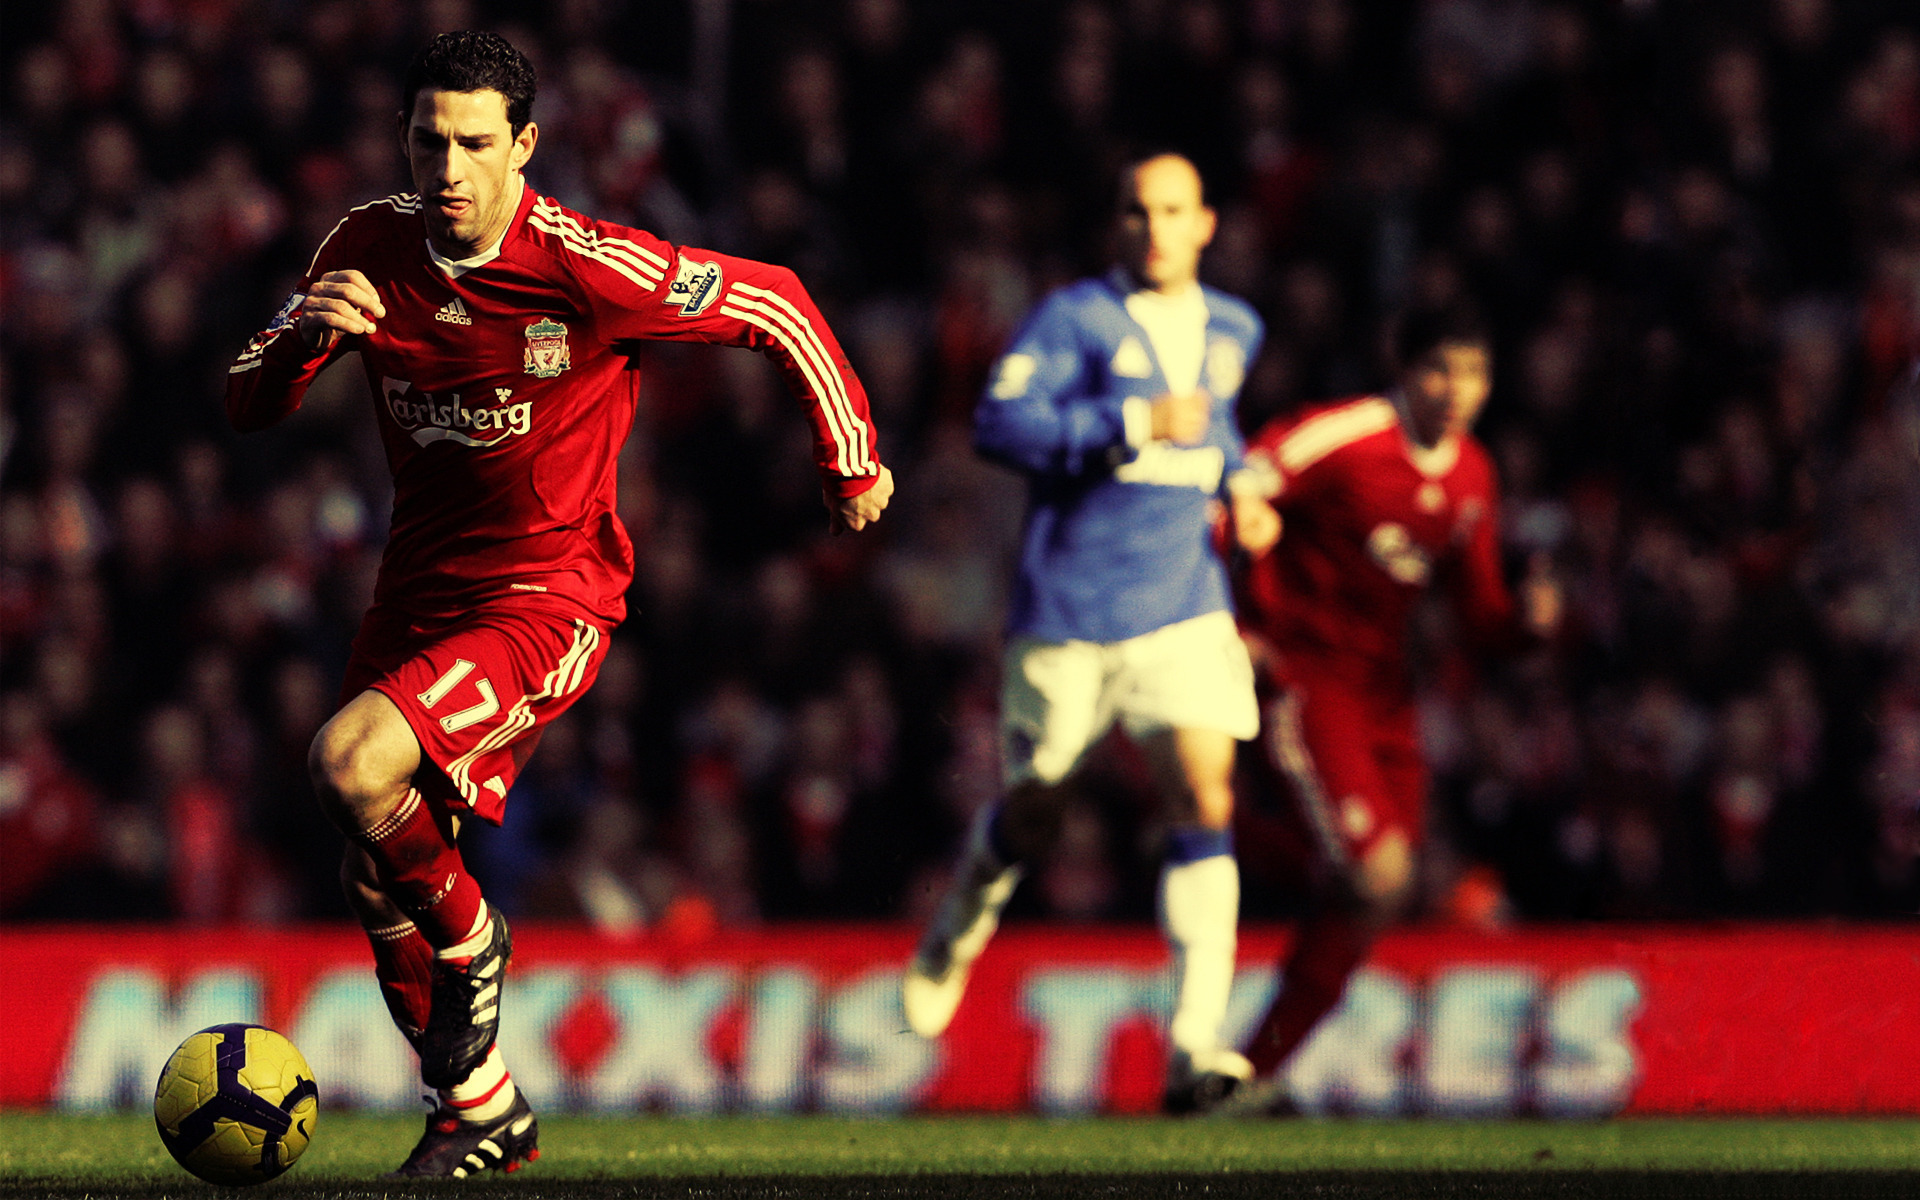 Maxi rodriguez hd papers and backgrounds